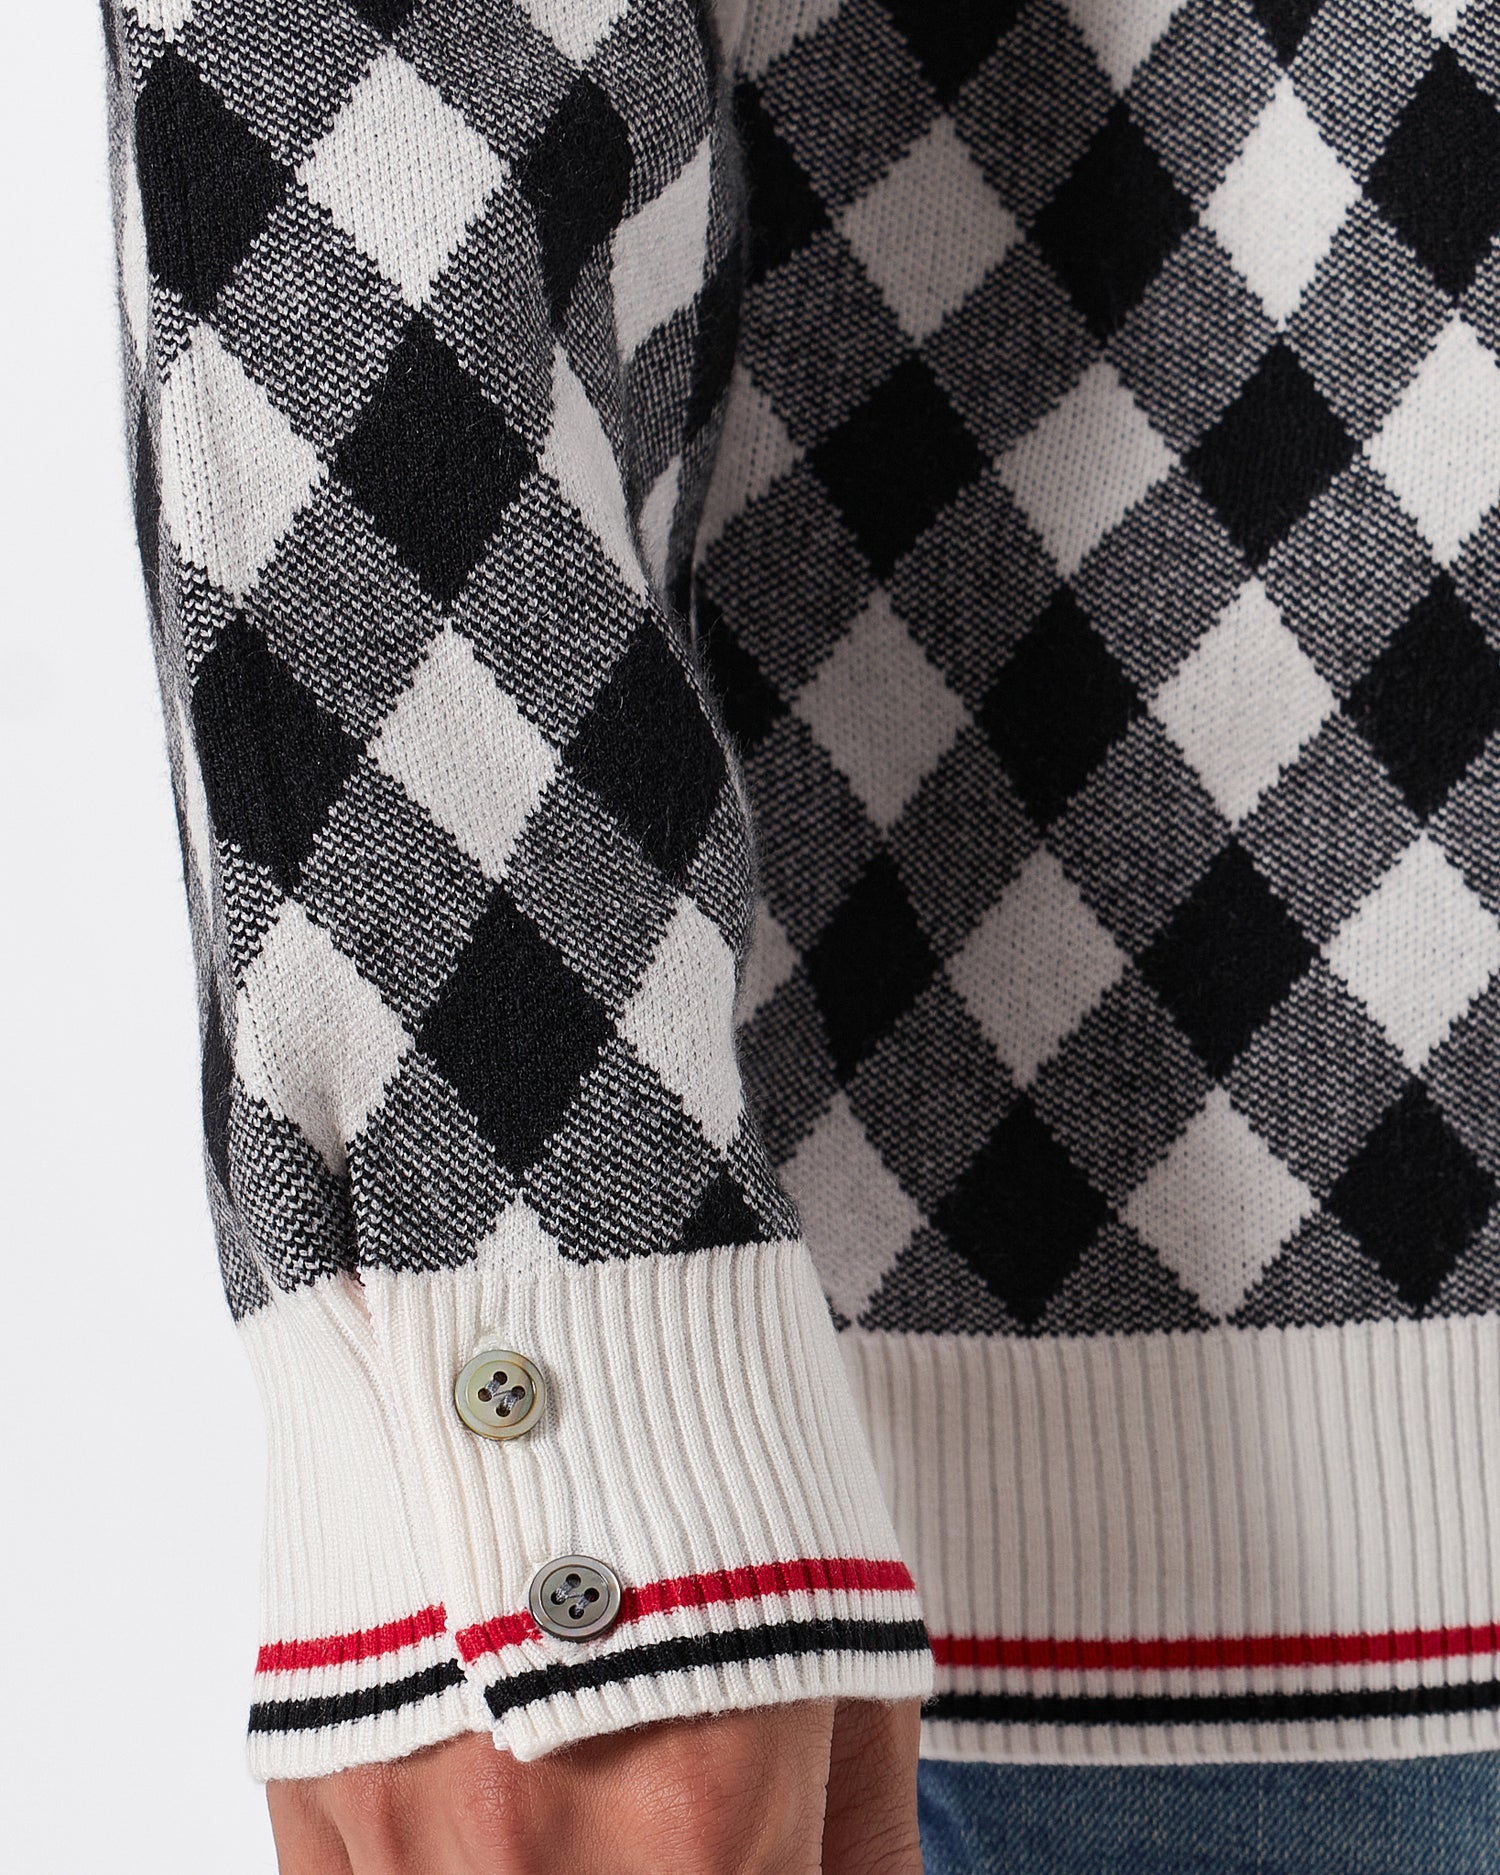 TB Gingham Checked Men Soft Knit Sweater 72.90